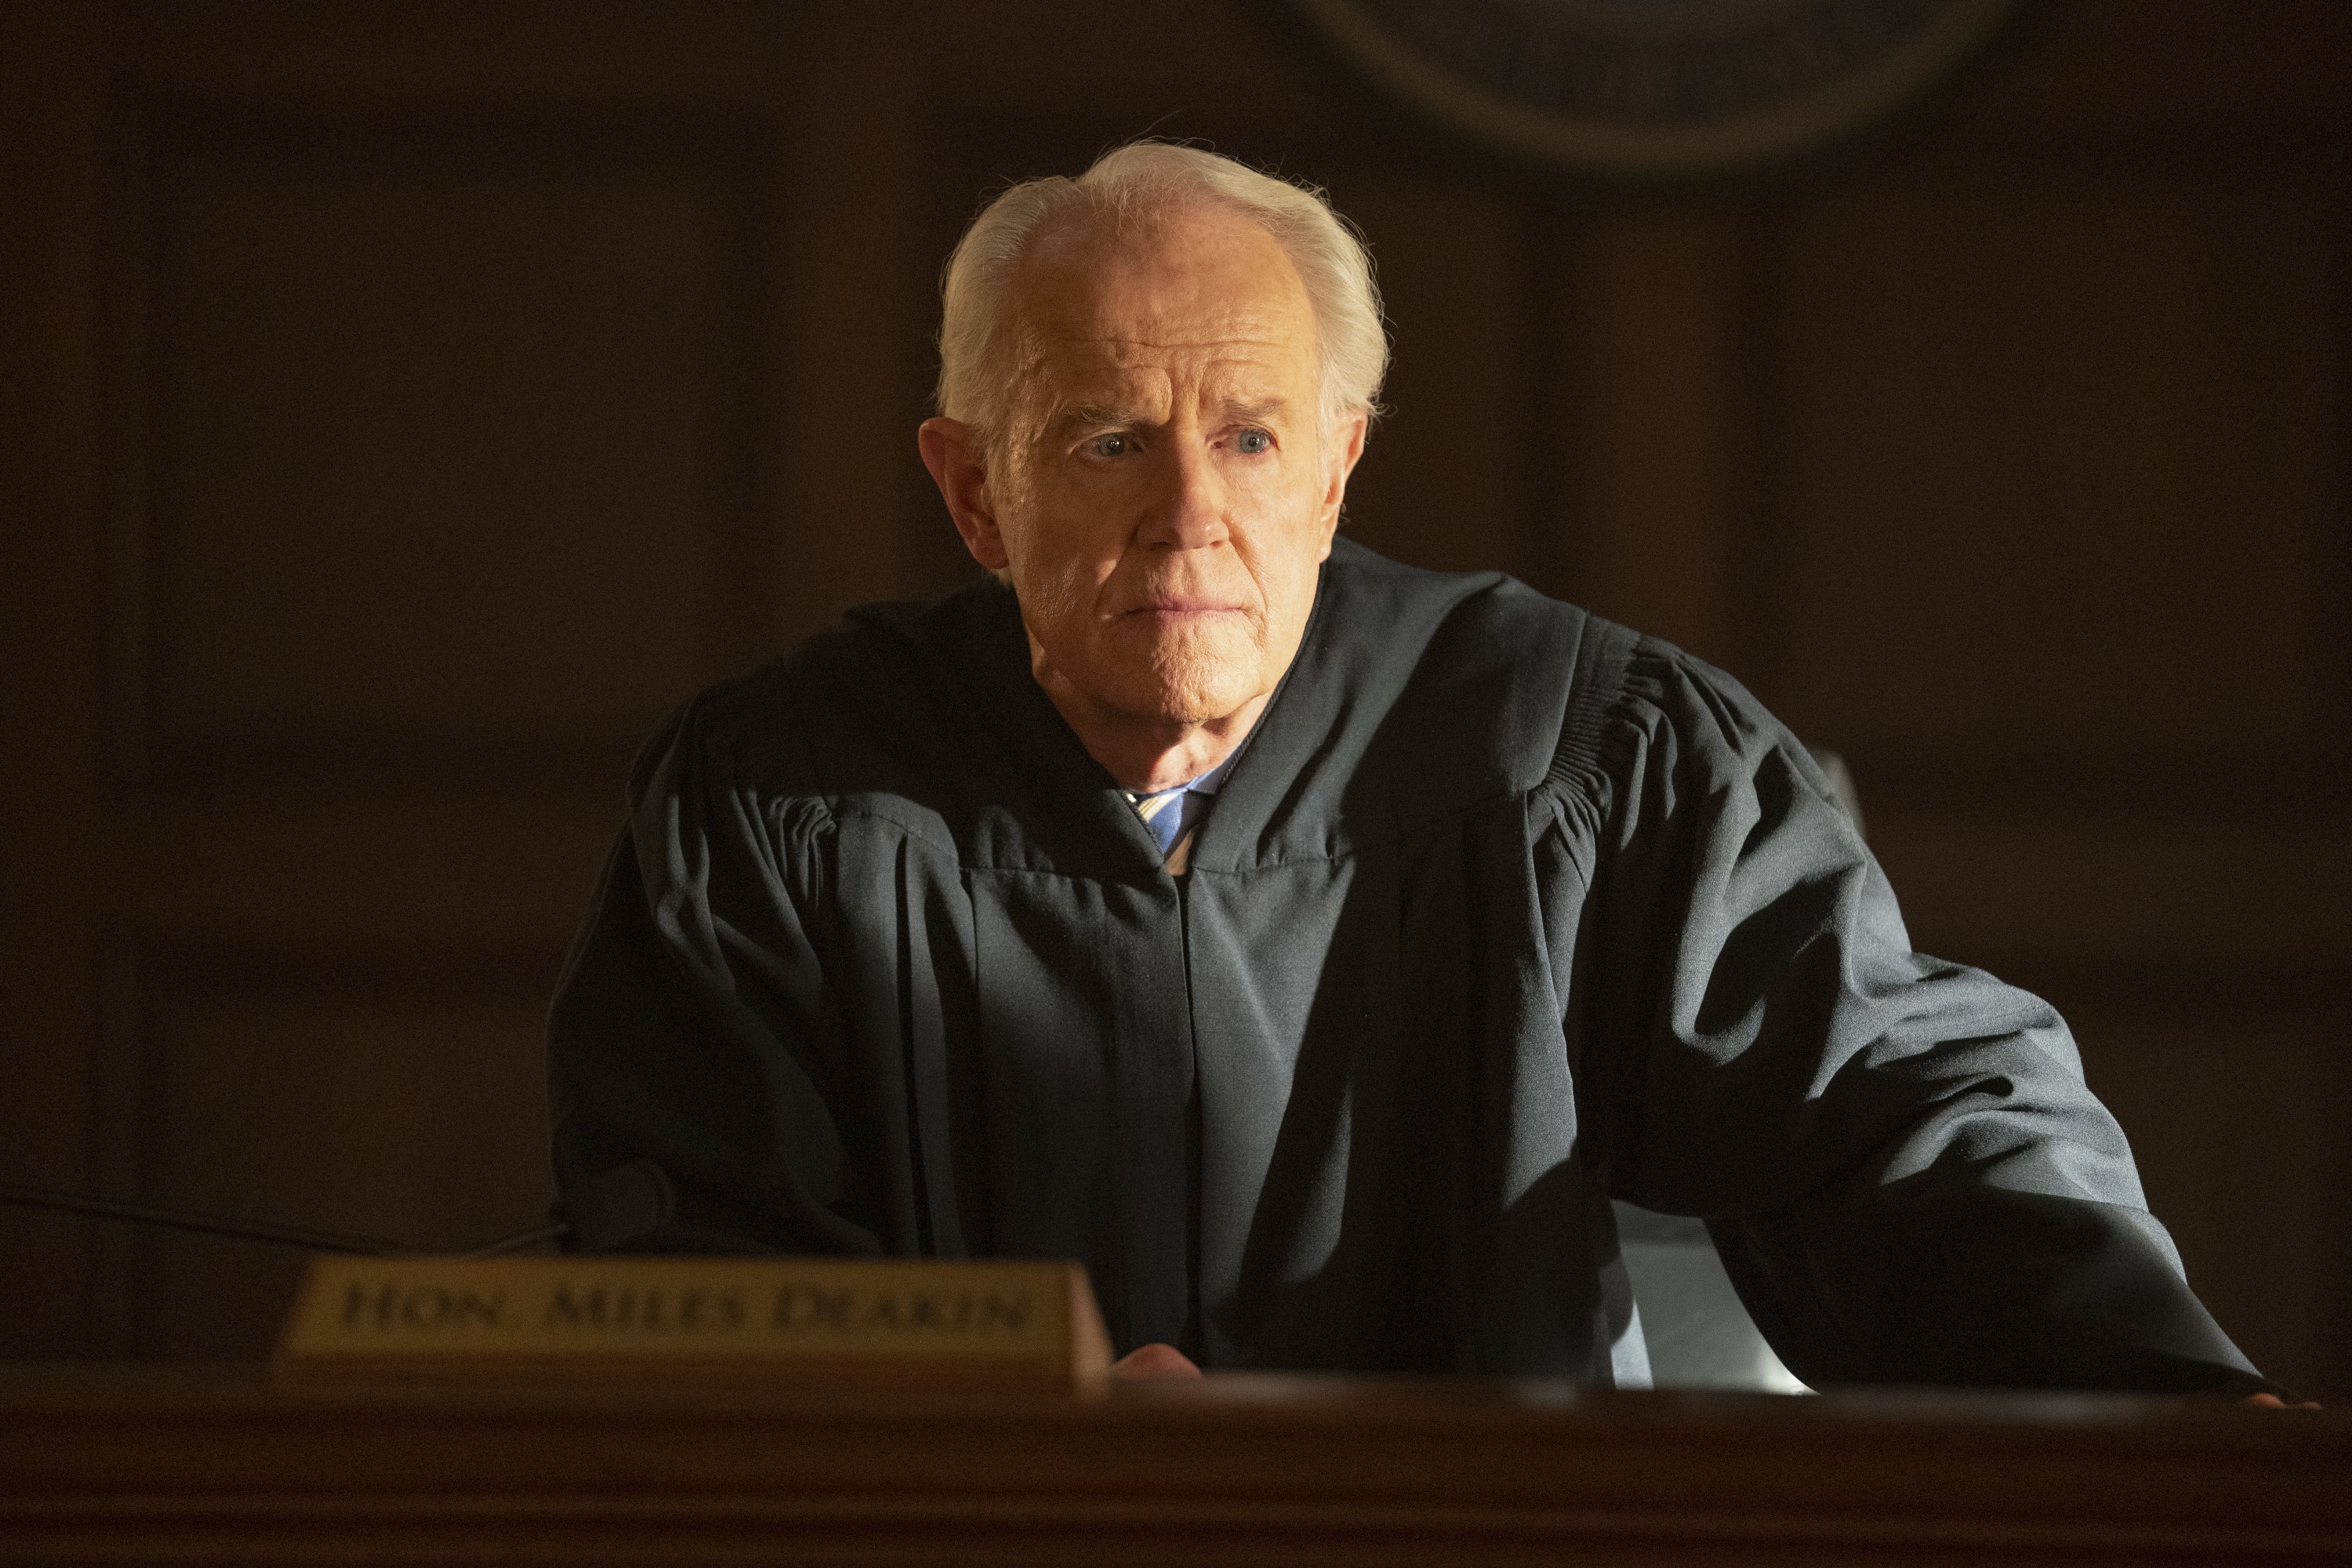 Mike Farrell as Judge Miles Deakin on the set of "NCIS" on March 21, 2019 | Source: Getty Images